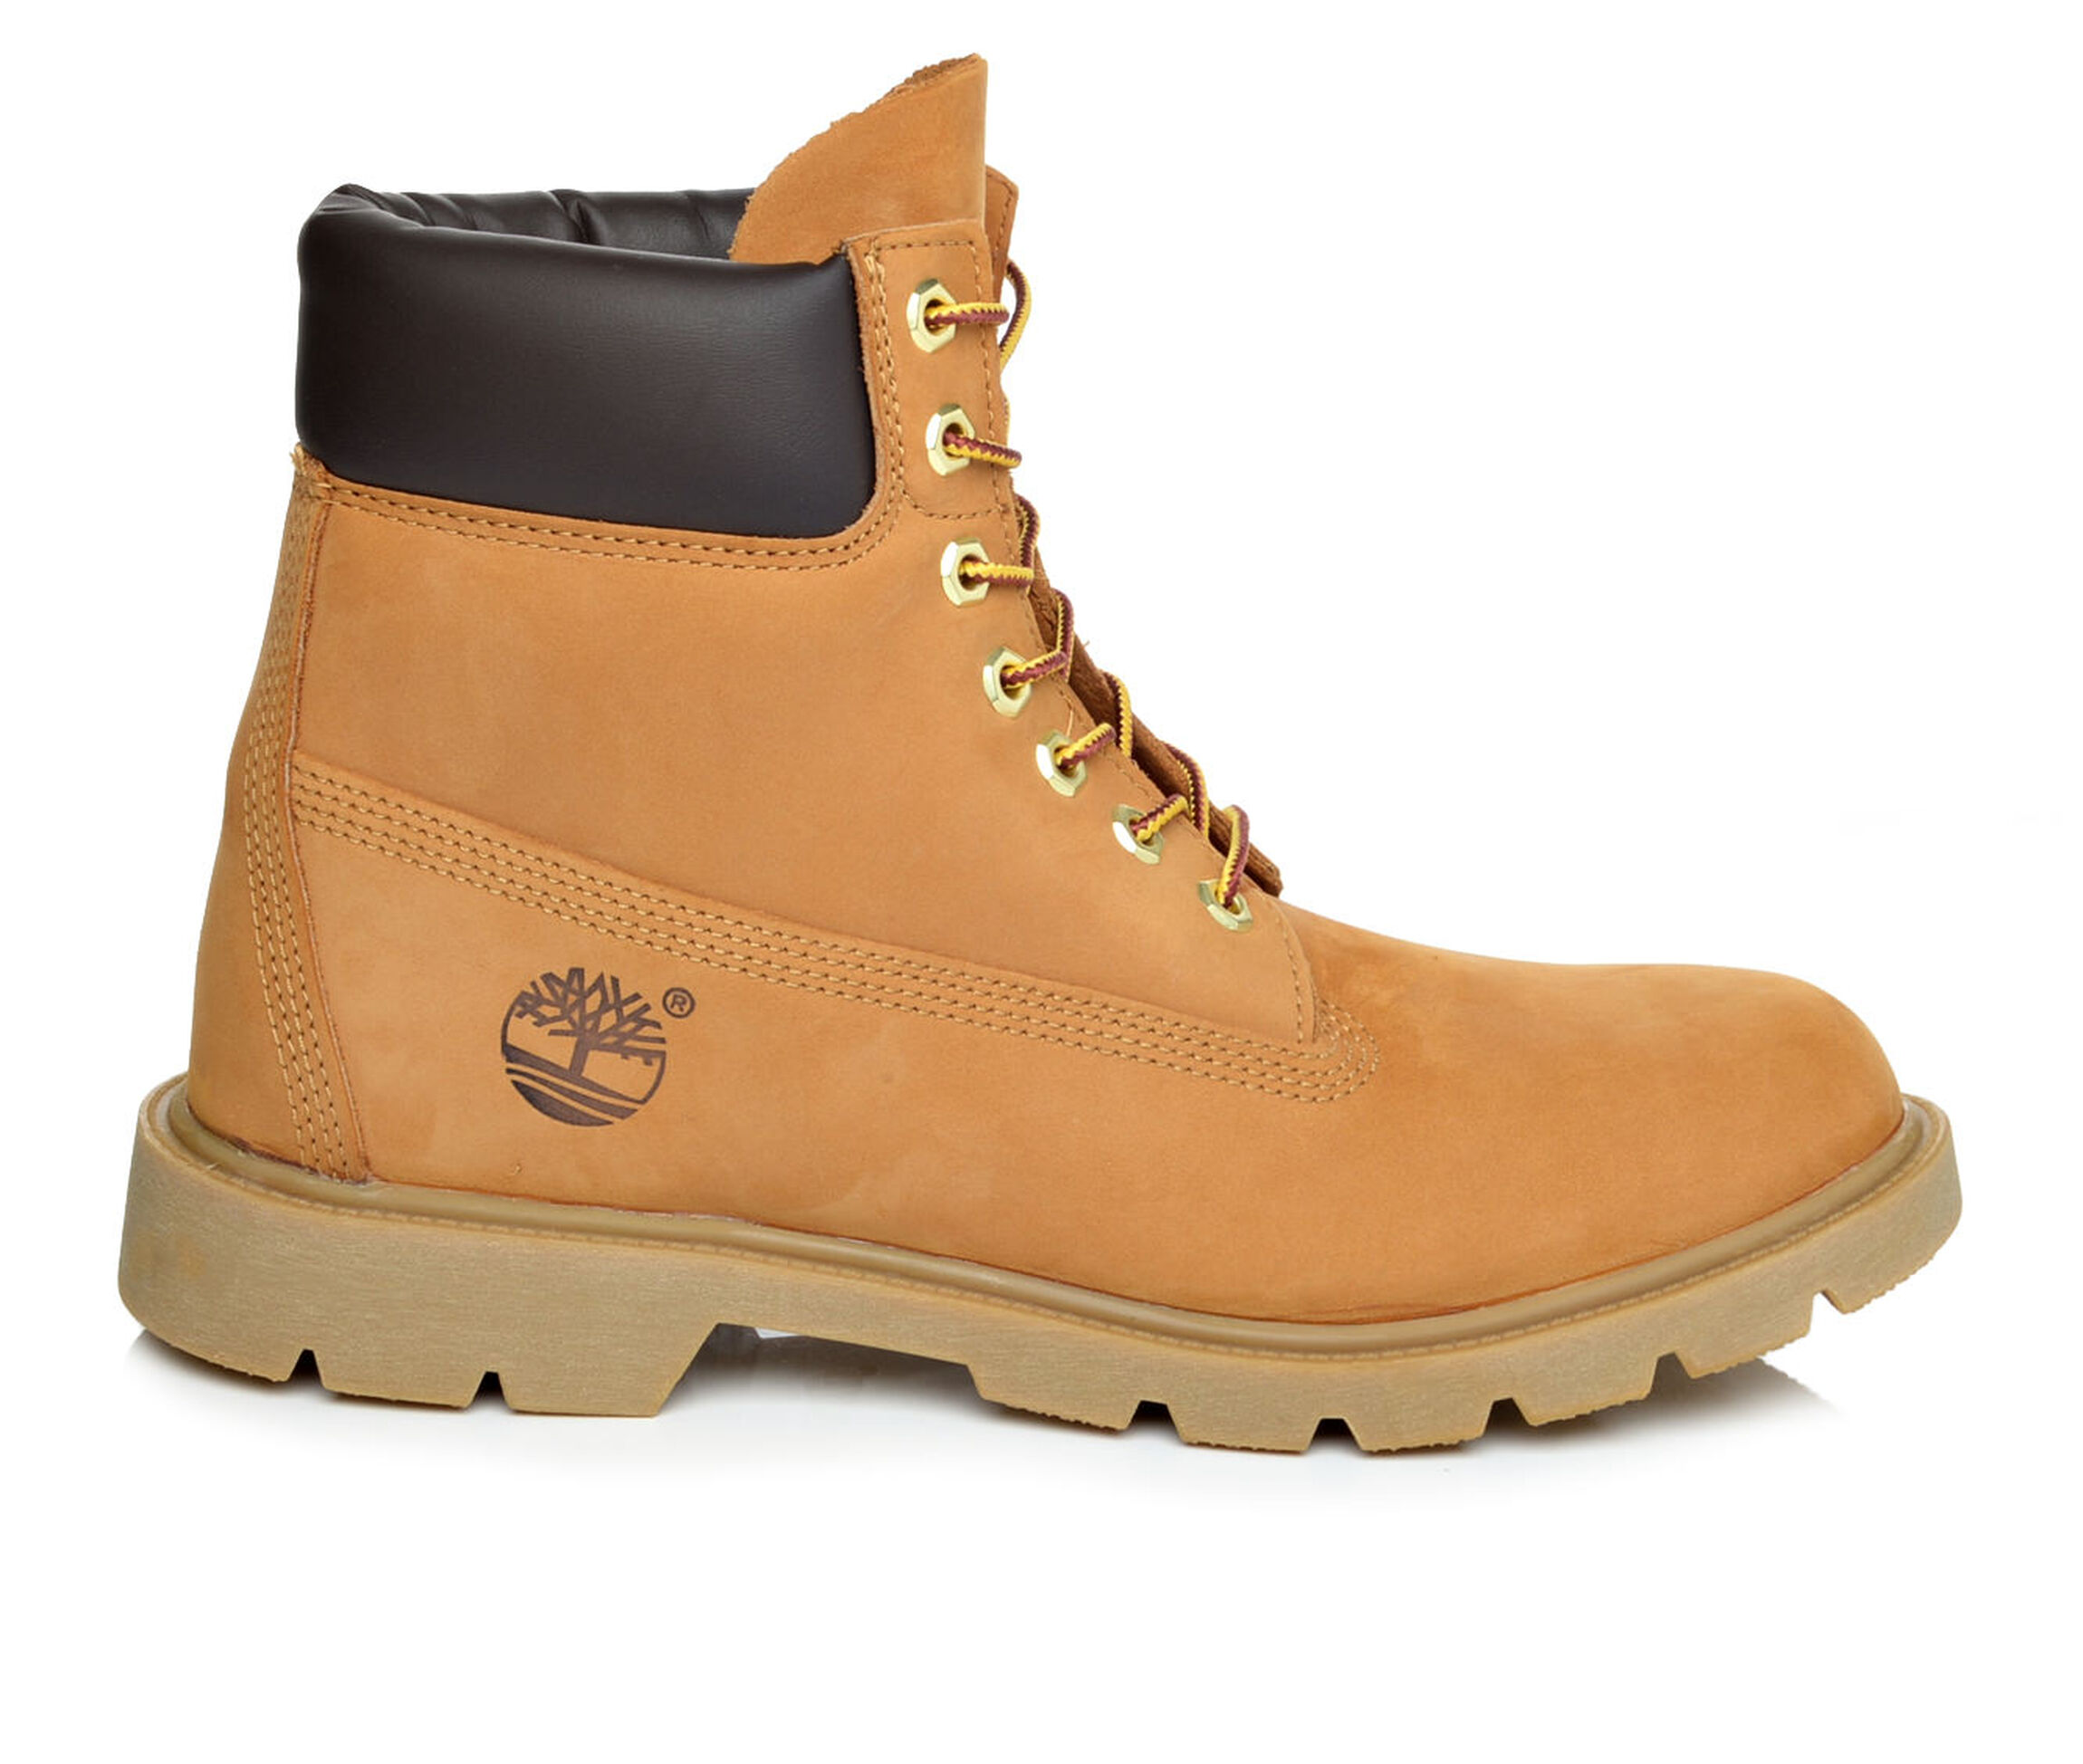 Timberland Boots & Shoes | Carnival